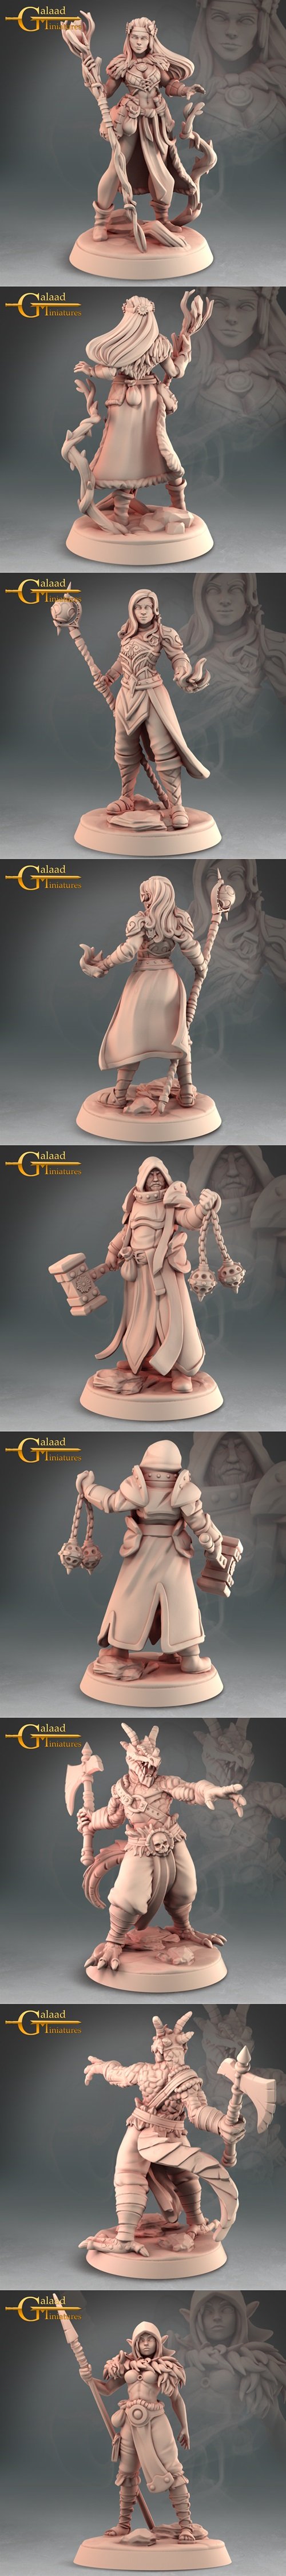 Into The Woods - Heroes – 3D Print